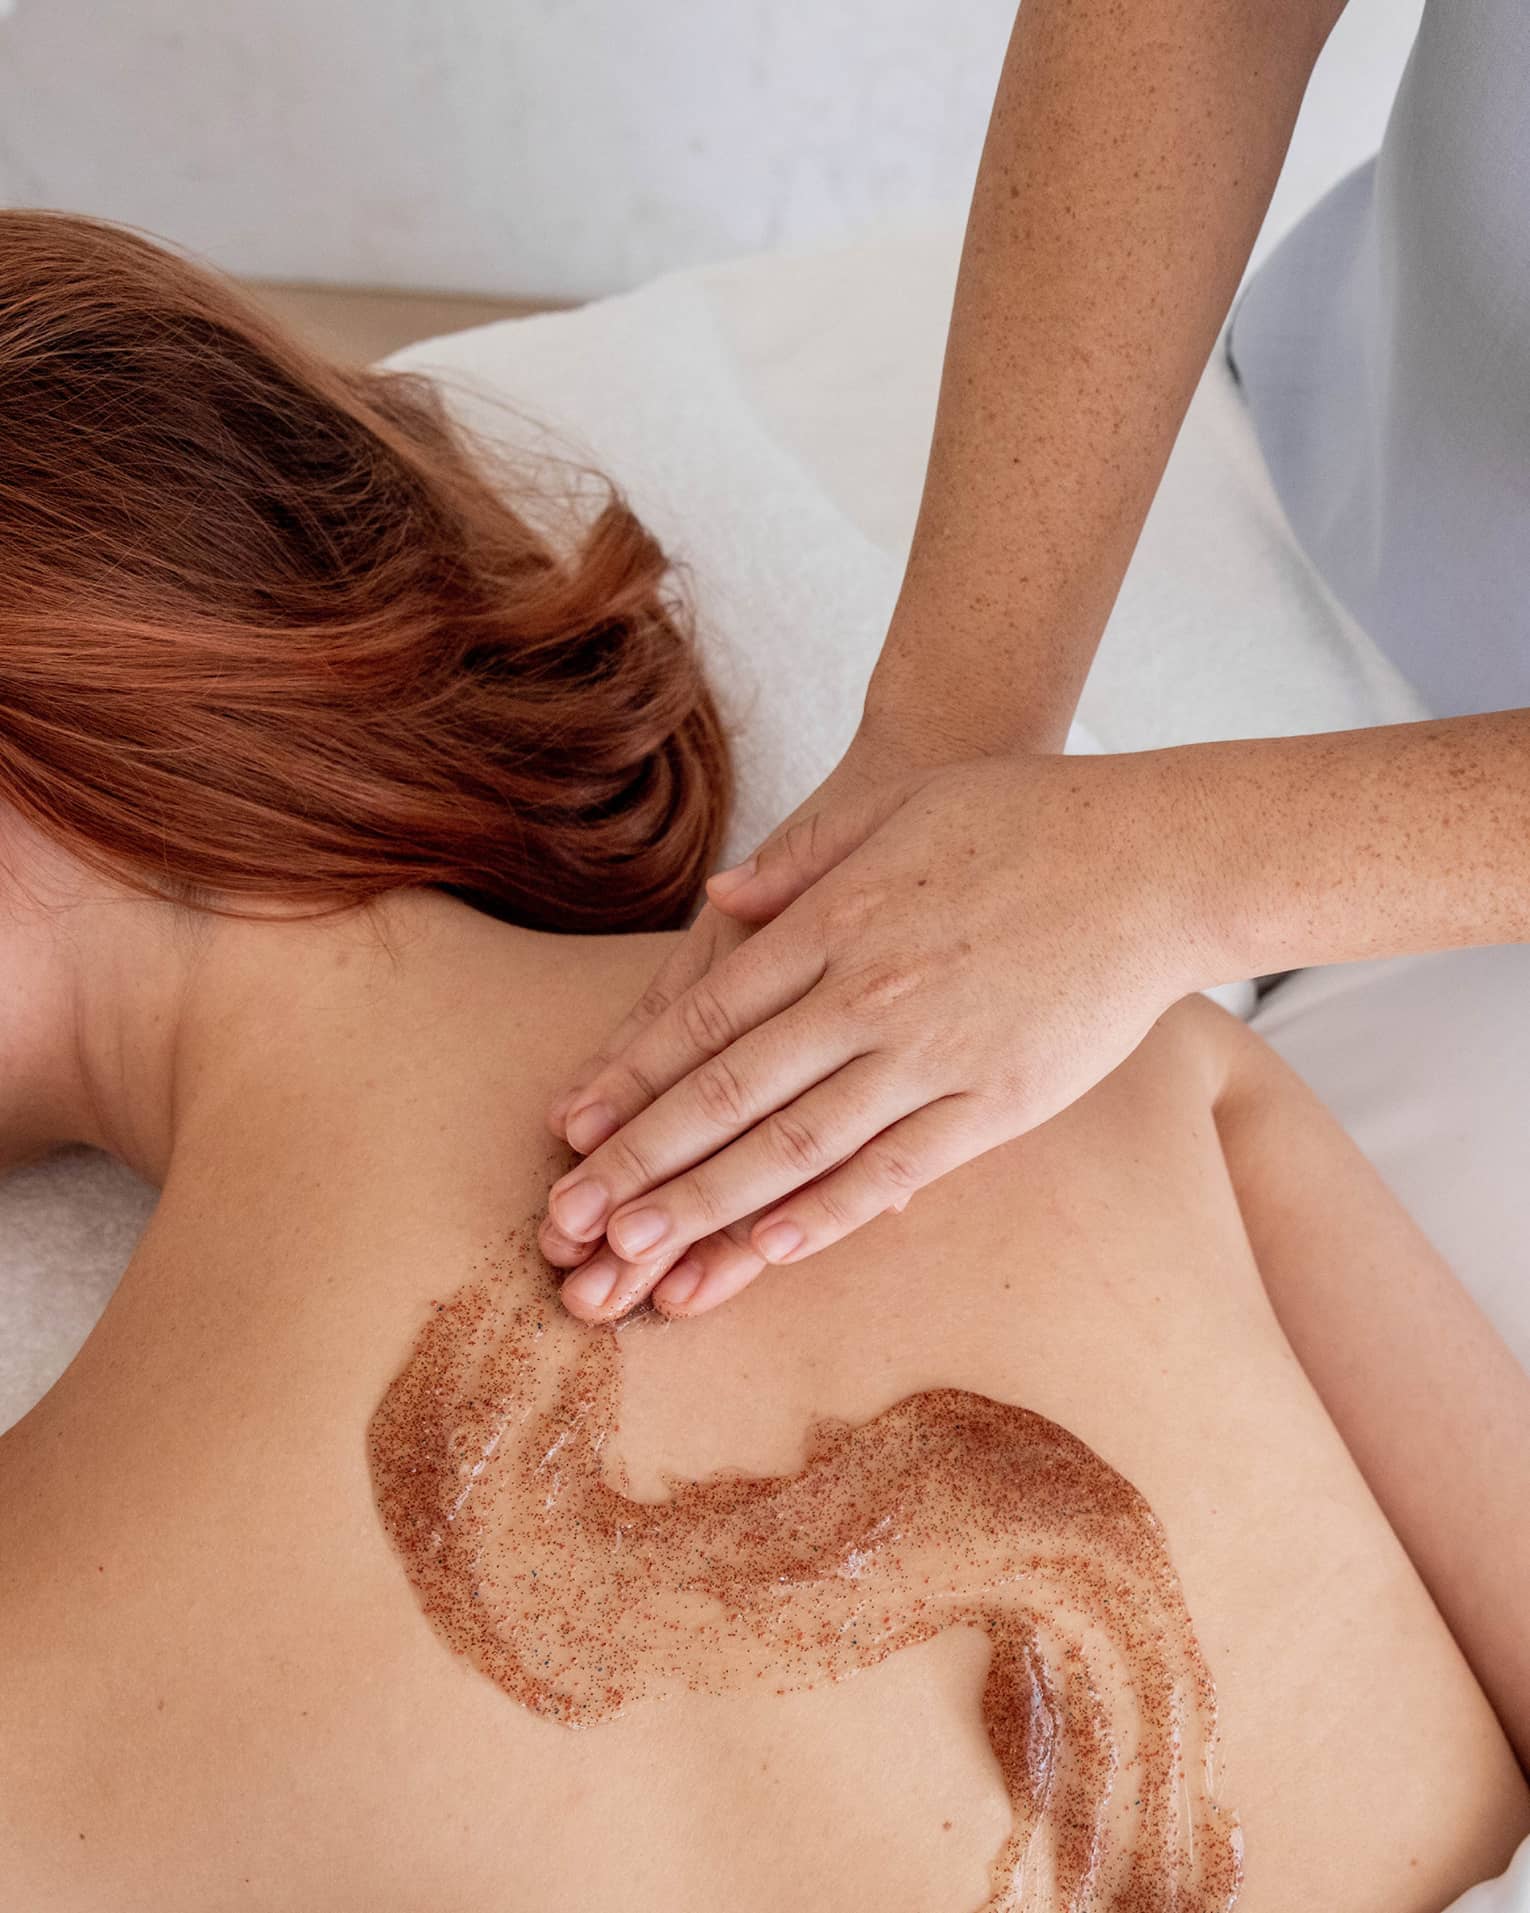 Spa staff massages scrub onto woman's bare back in treatment room